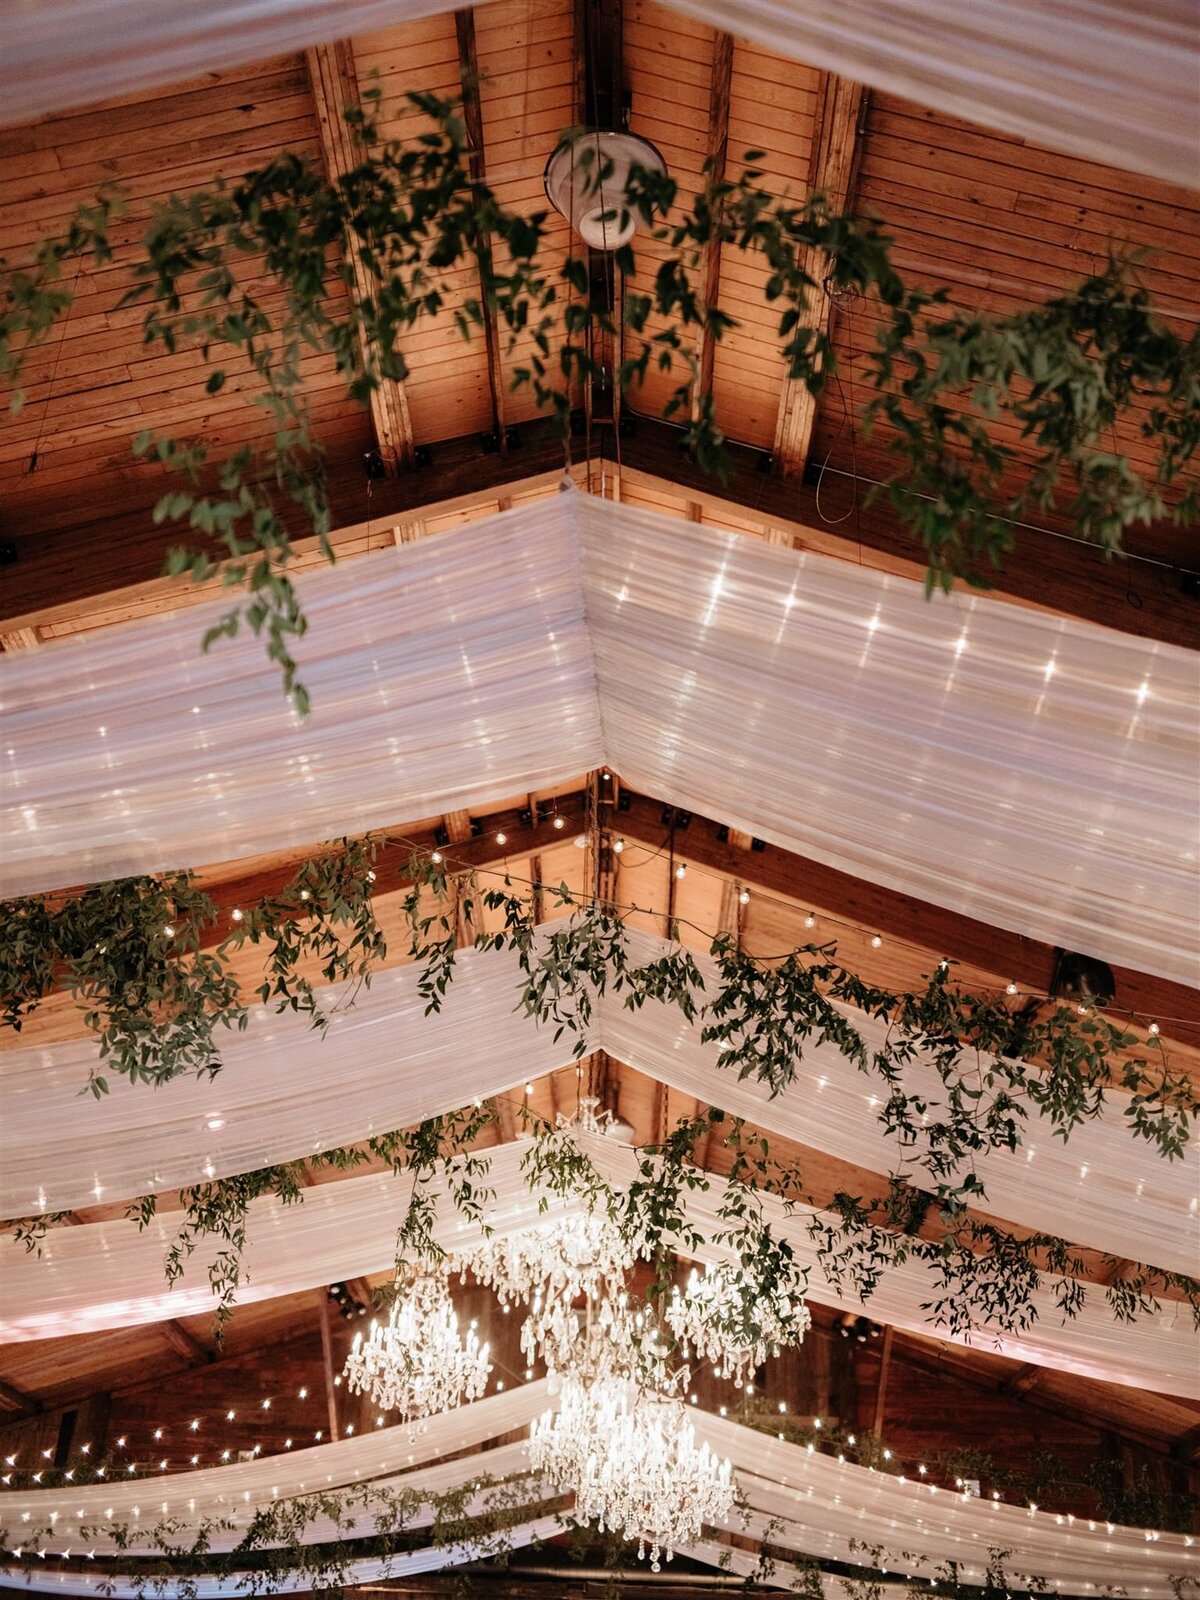 Stunning detail shot of white fabric swags hanging from ceiling alongside twinkle lights and large branches of greenery at Cedar Lakes Estate wedding venue reception space.